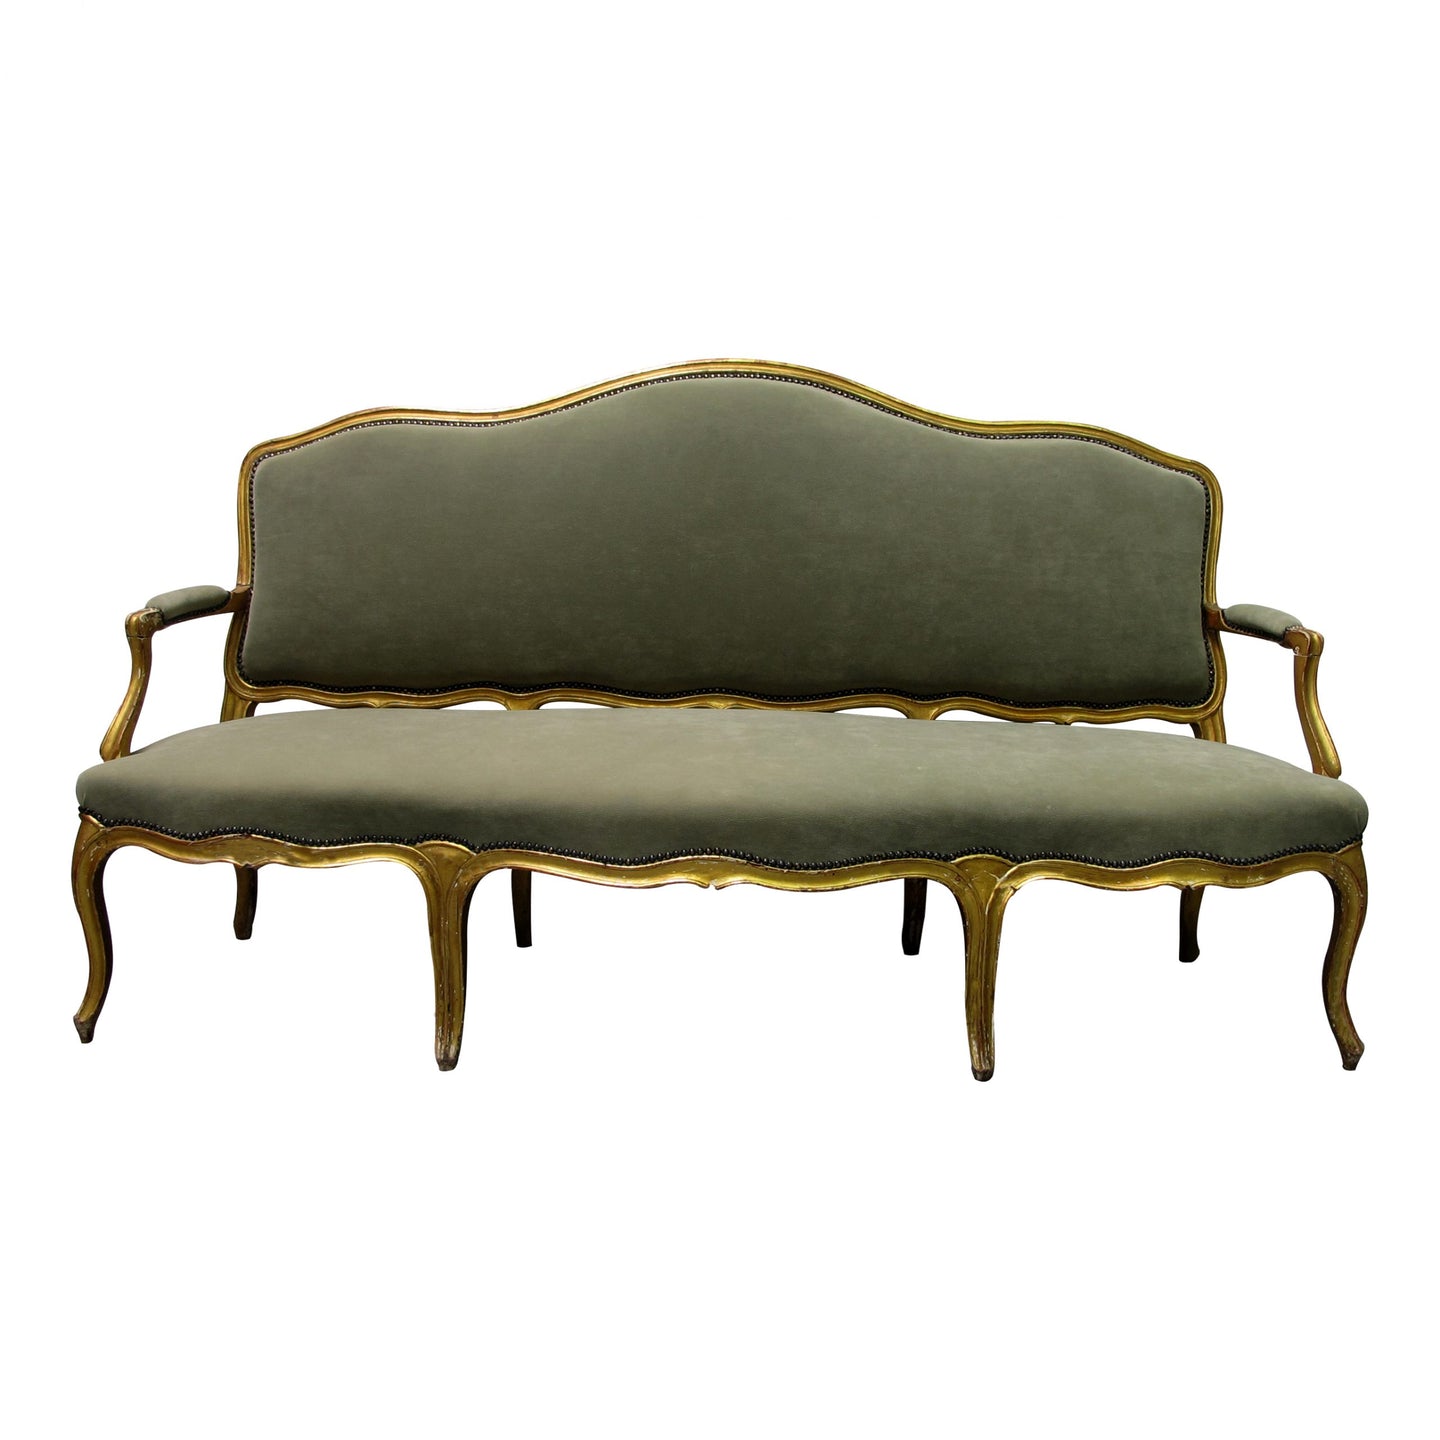 Late 19th Century French gilded sofa, Louis XV style